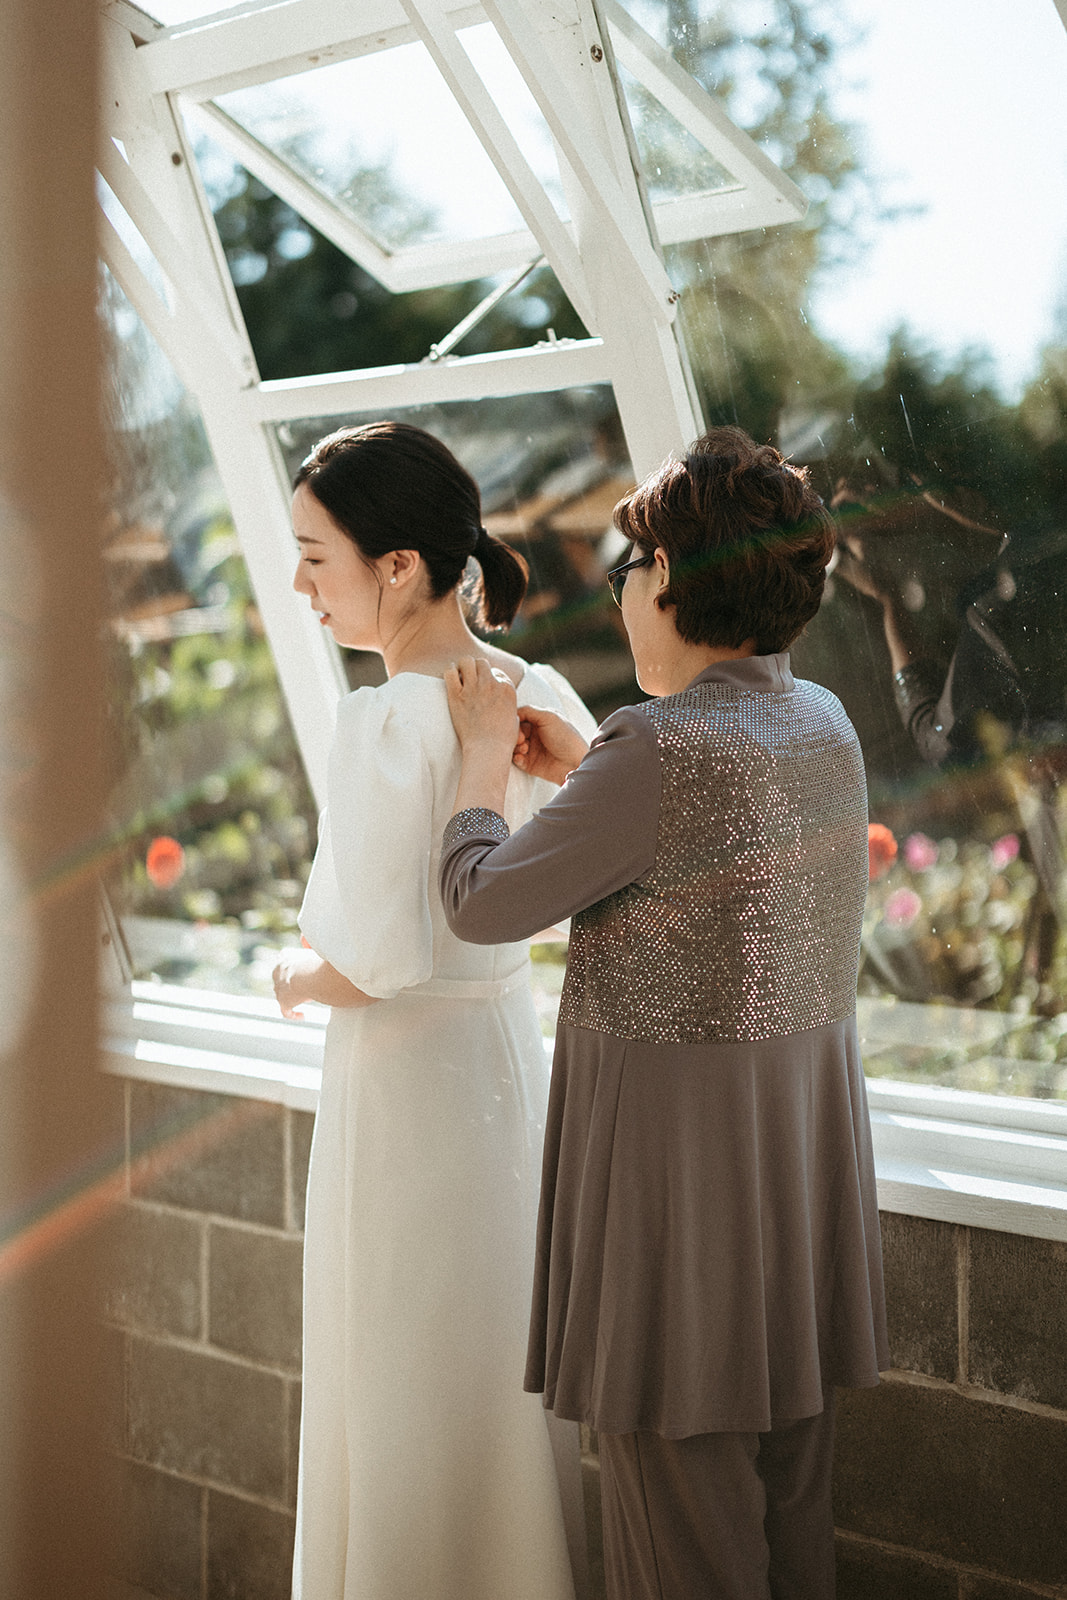 getting ready for wedding day, bridal portraits, outdoor greenhouse wedding